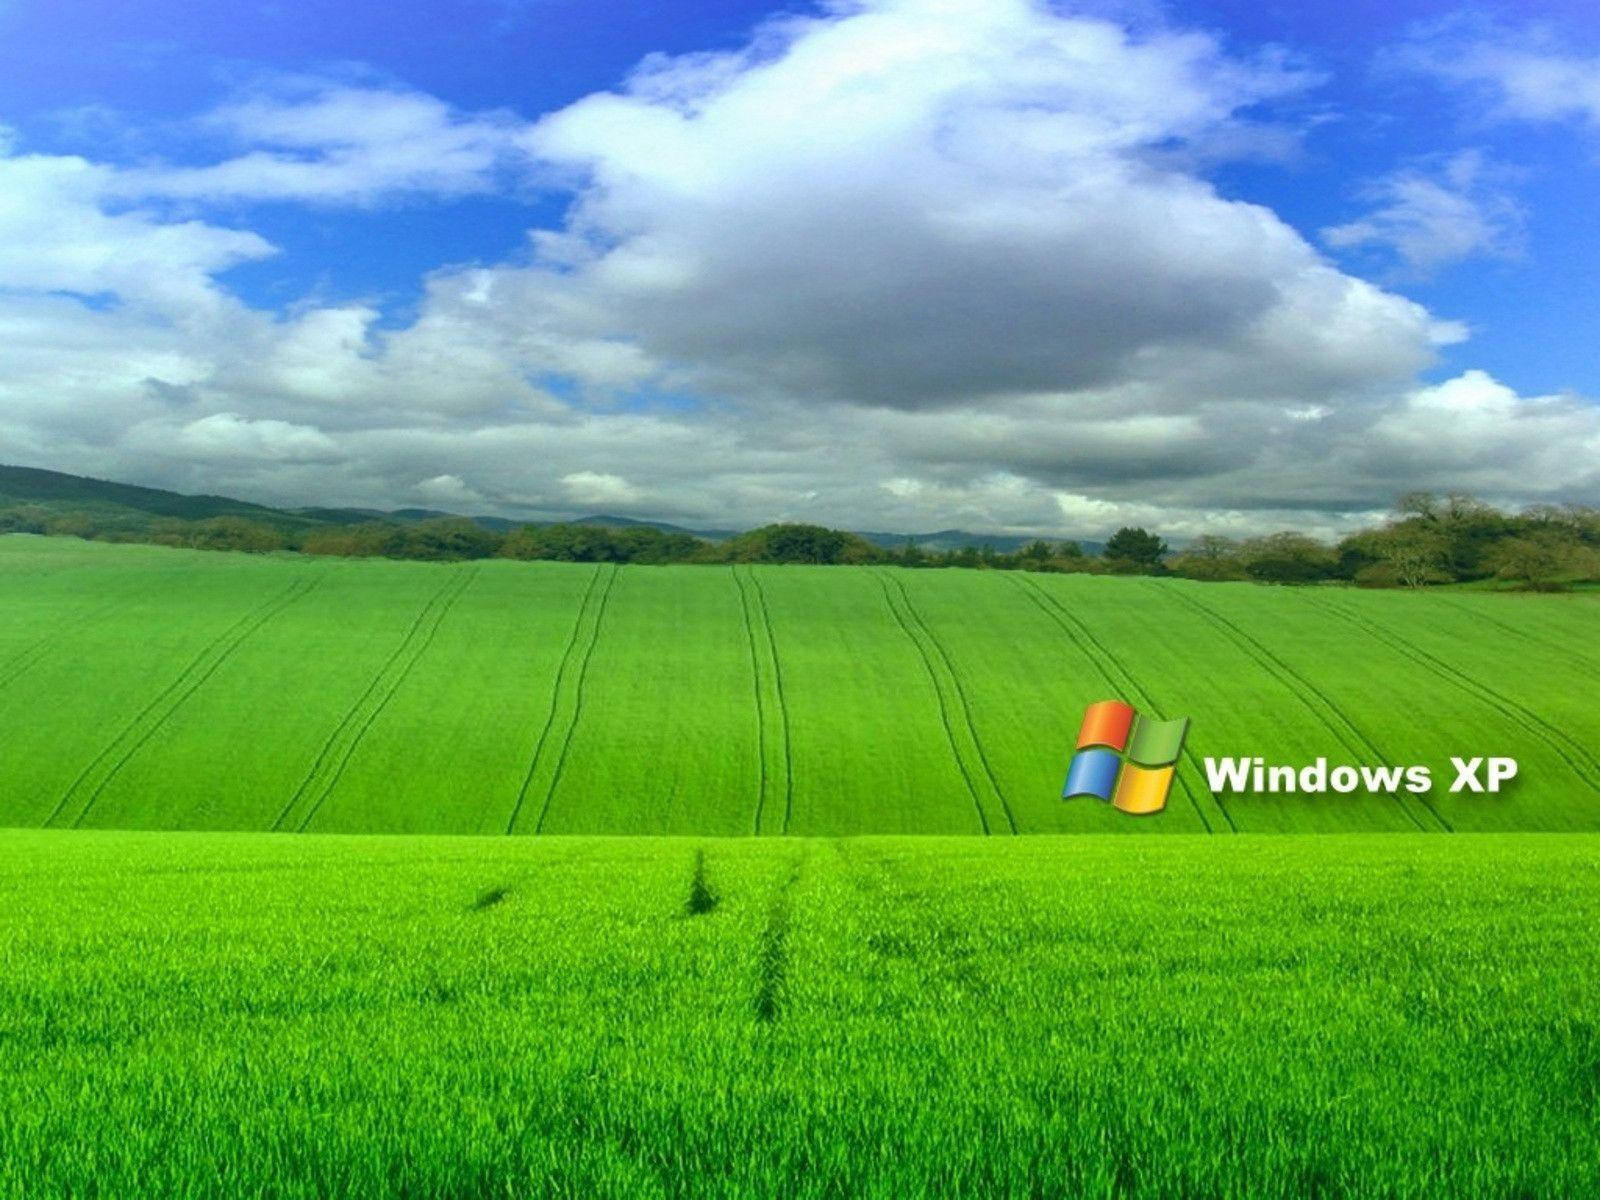 Windows Xp Wallpapers - Wallpapers For Windows Xp Background